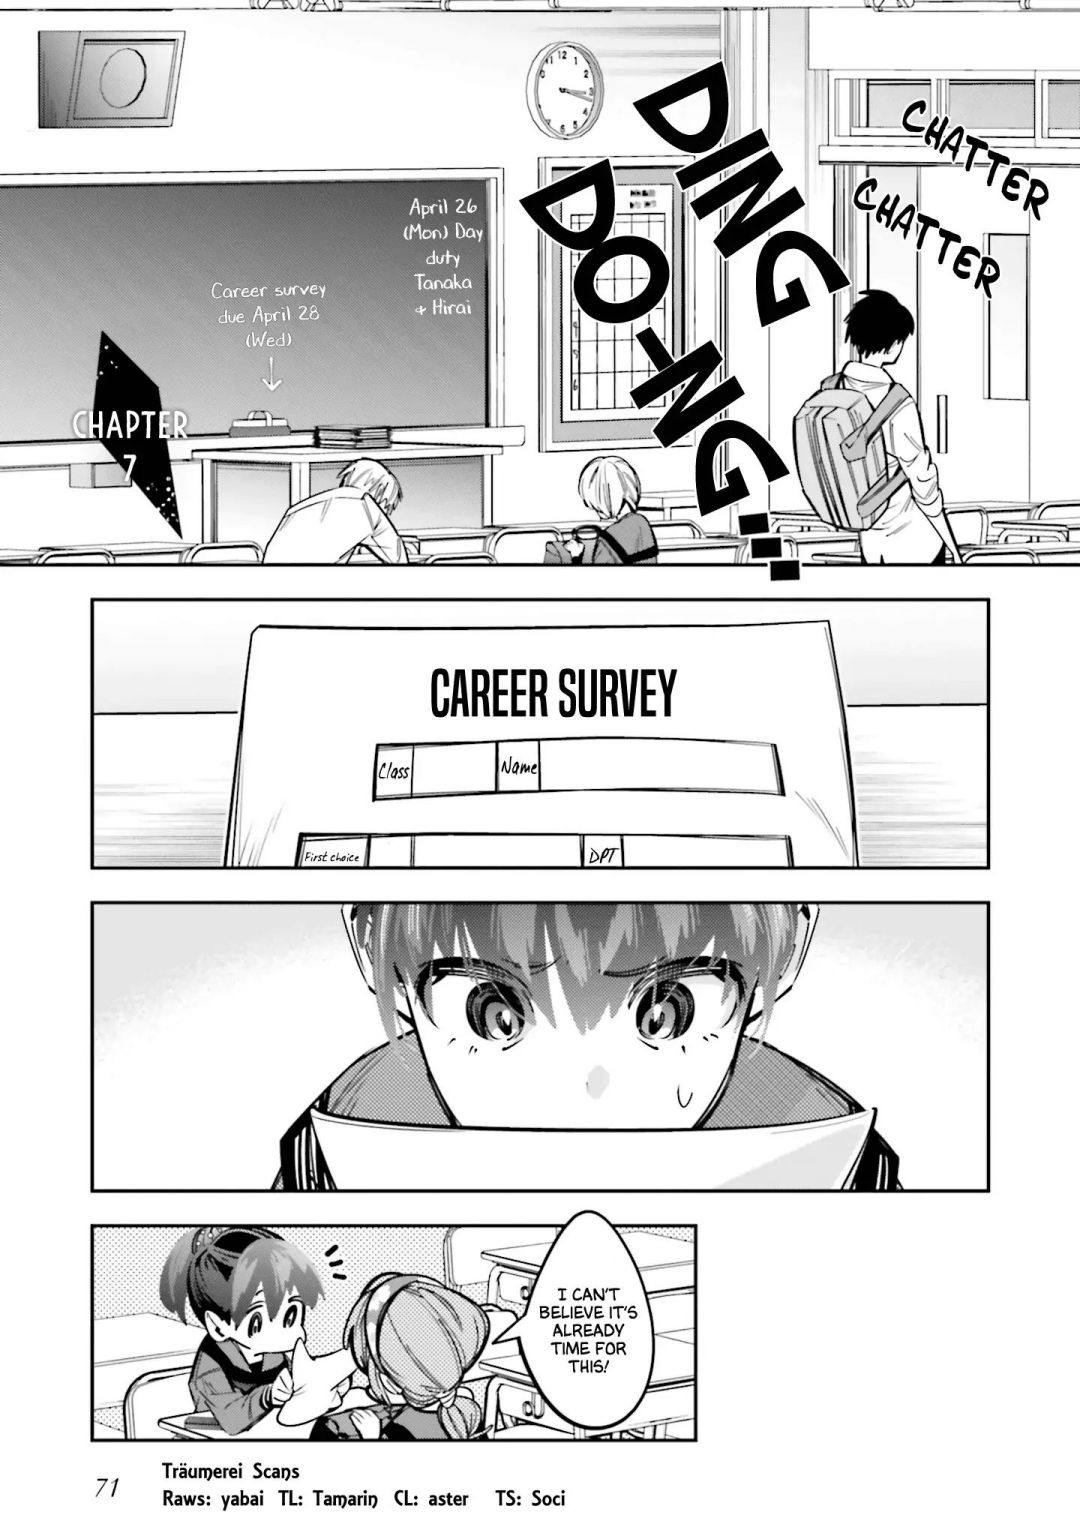 I Reincarnated As The Little Sister Of A Death Game Manga’S Murd3R Mastermind And Failed - chapter 7 - #1